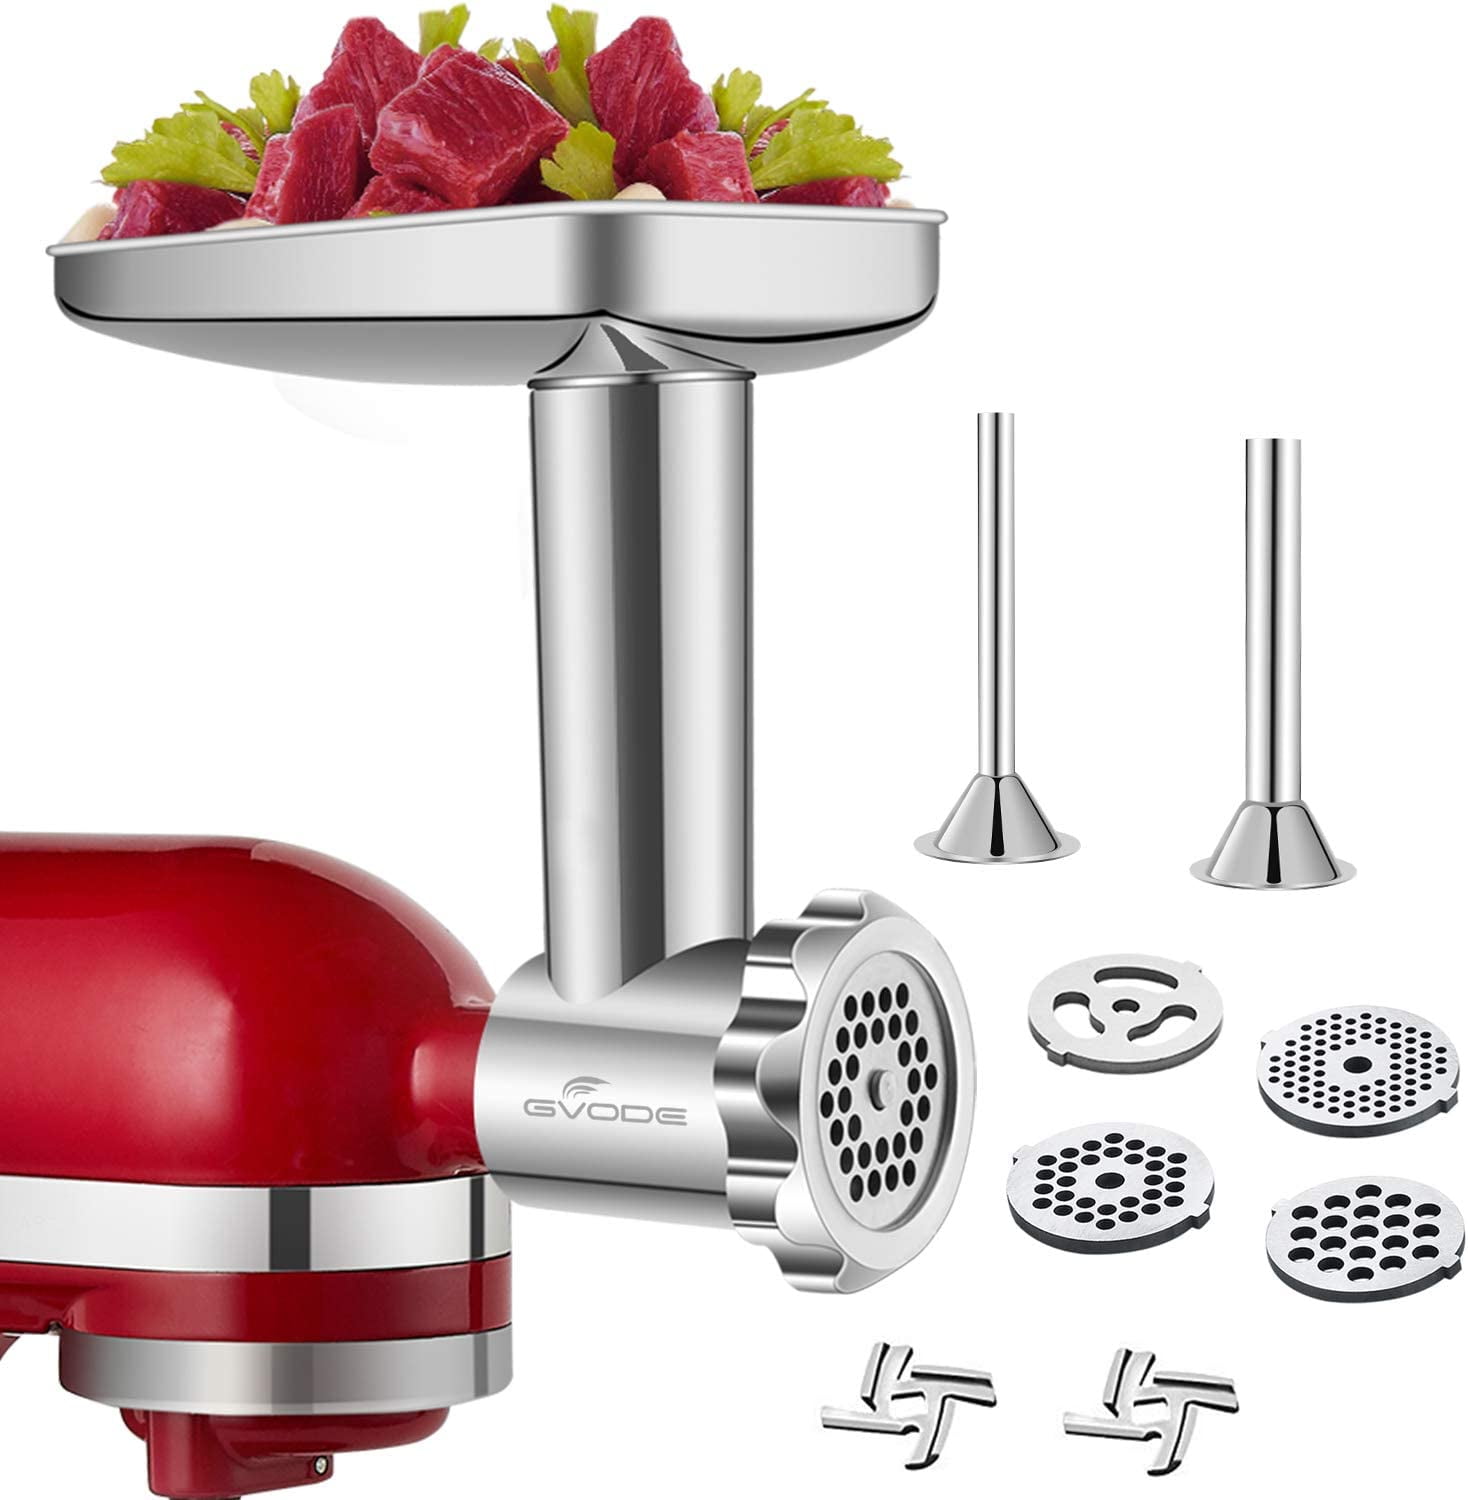 Stainless Steel General Attachment for kitchenaid Mixers Including Sausage Stainless Steel Dishwasher Safe - Walmart.com